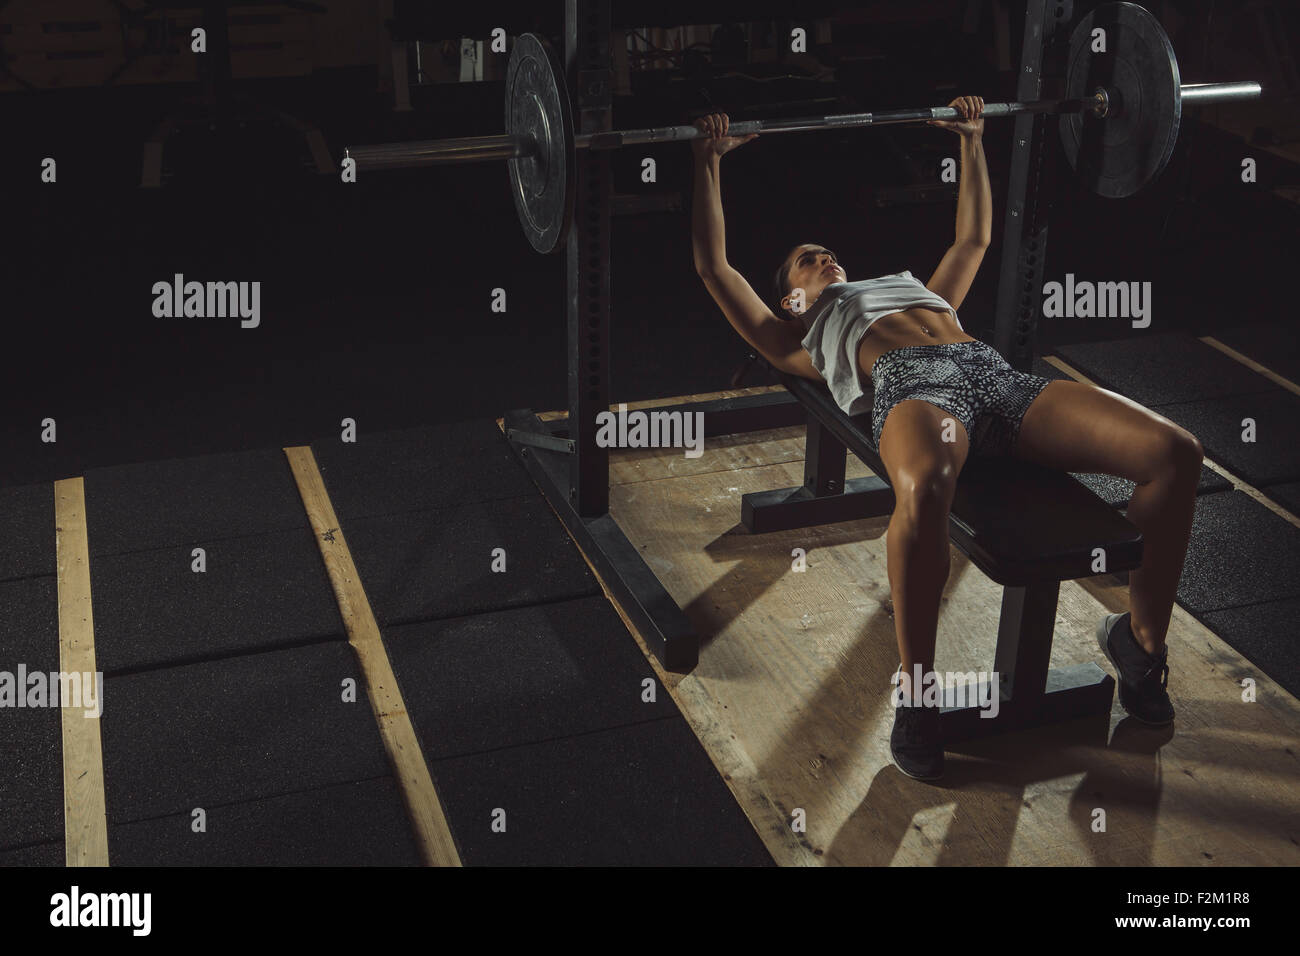 Female athlete doing bench presses with barbell Stock Photo